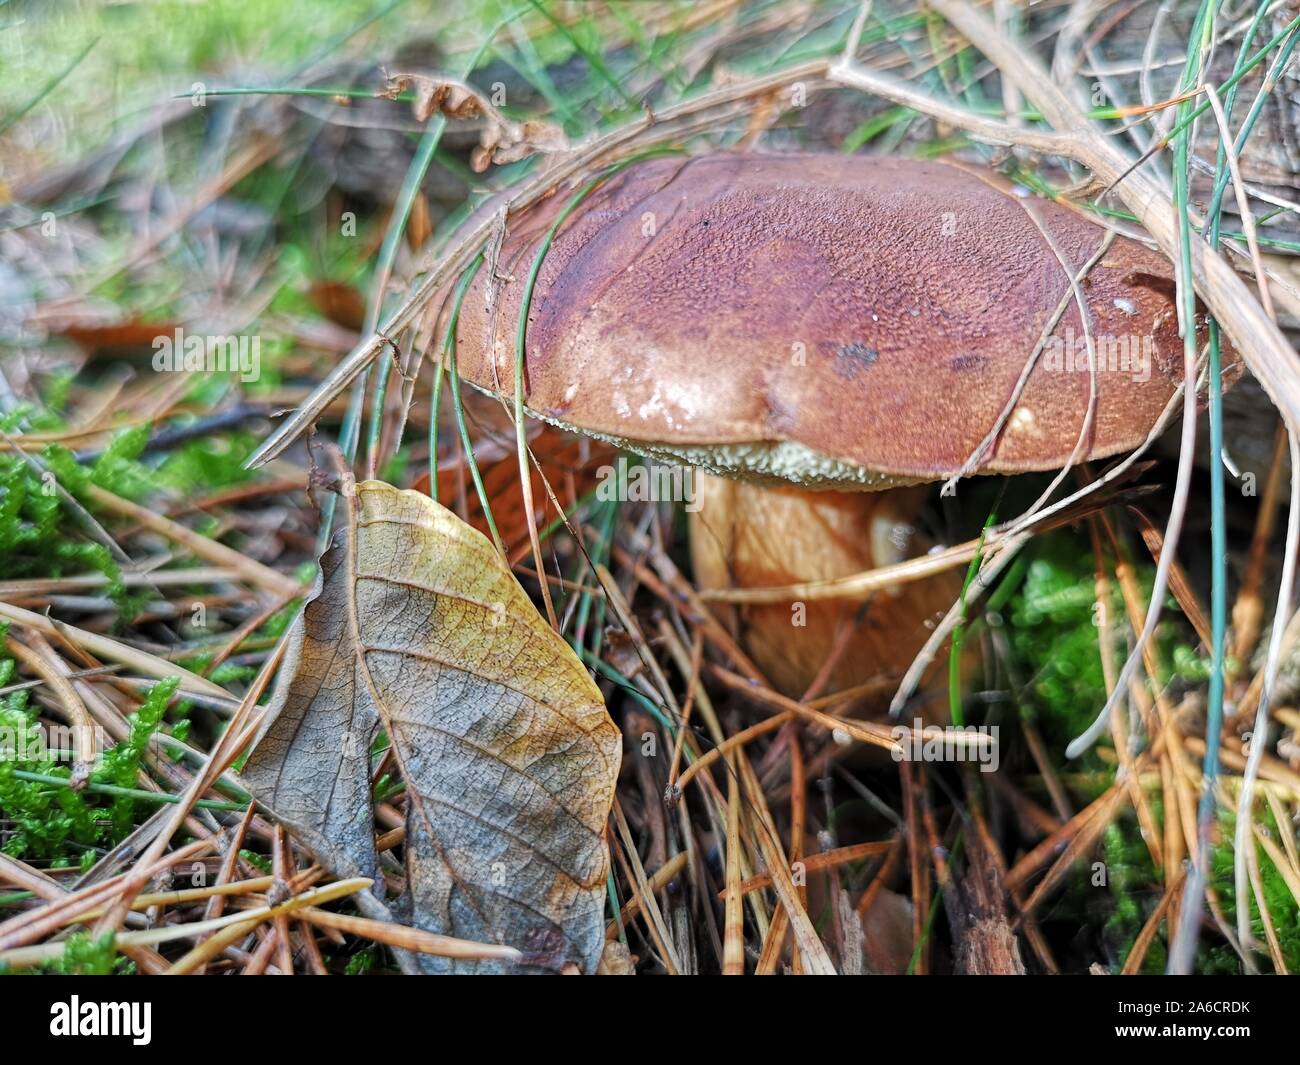 Ceps mushroom in grass with dry pine needles, close-up on edulis or porcini variety of edible mushroom Stock Photo